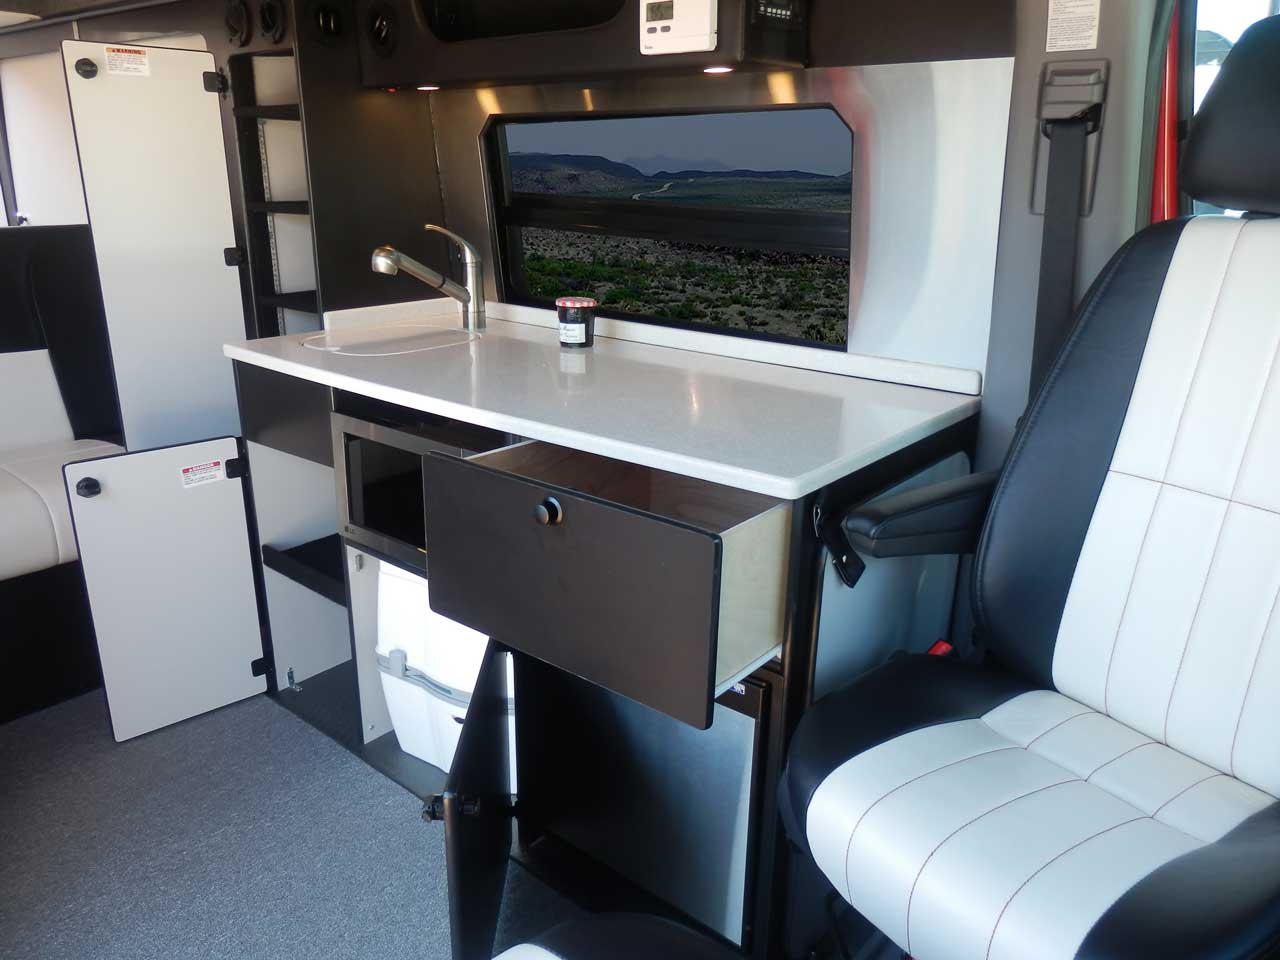 Sportsmobile camper van conversion with cabinets that feature doors and drawers.